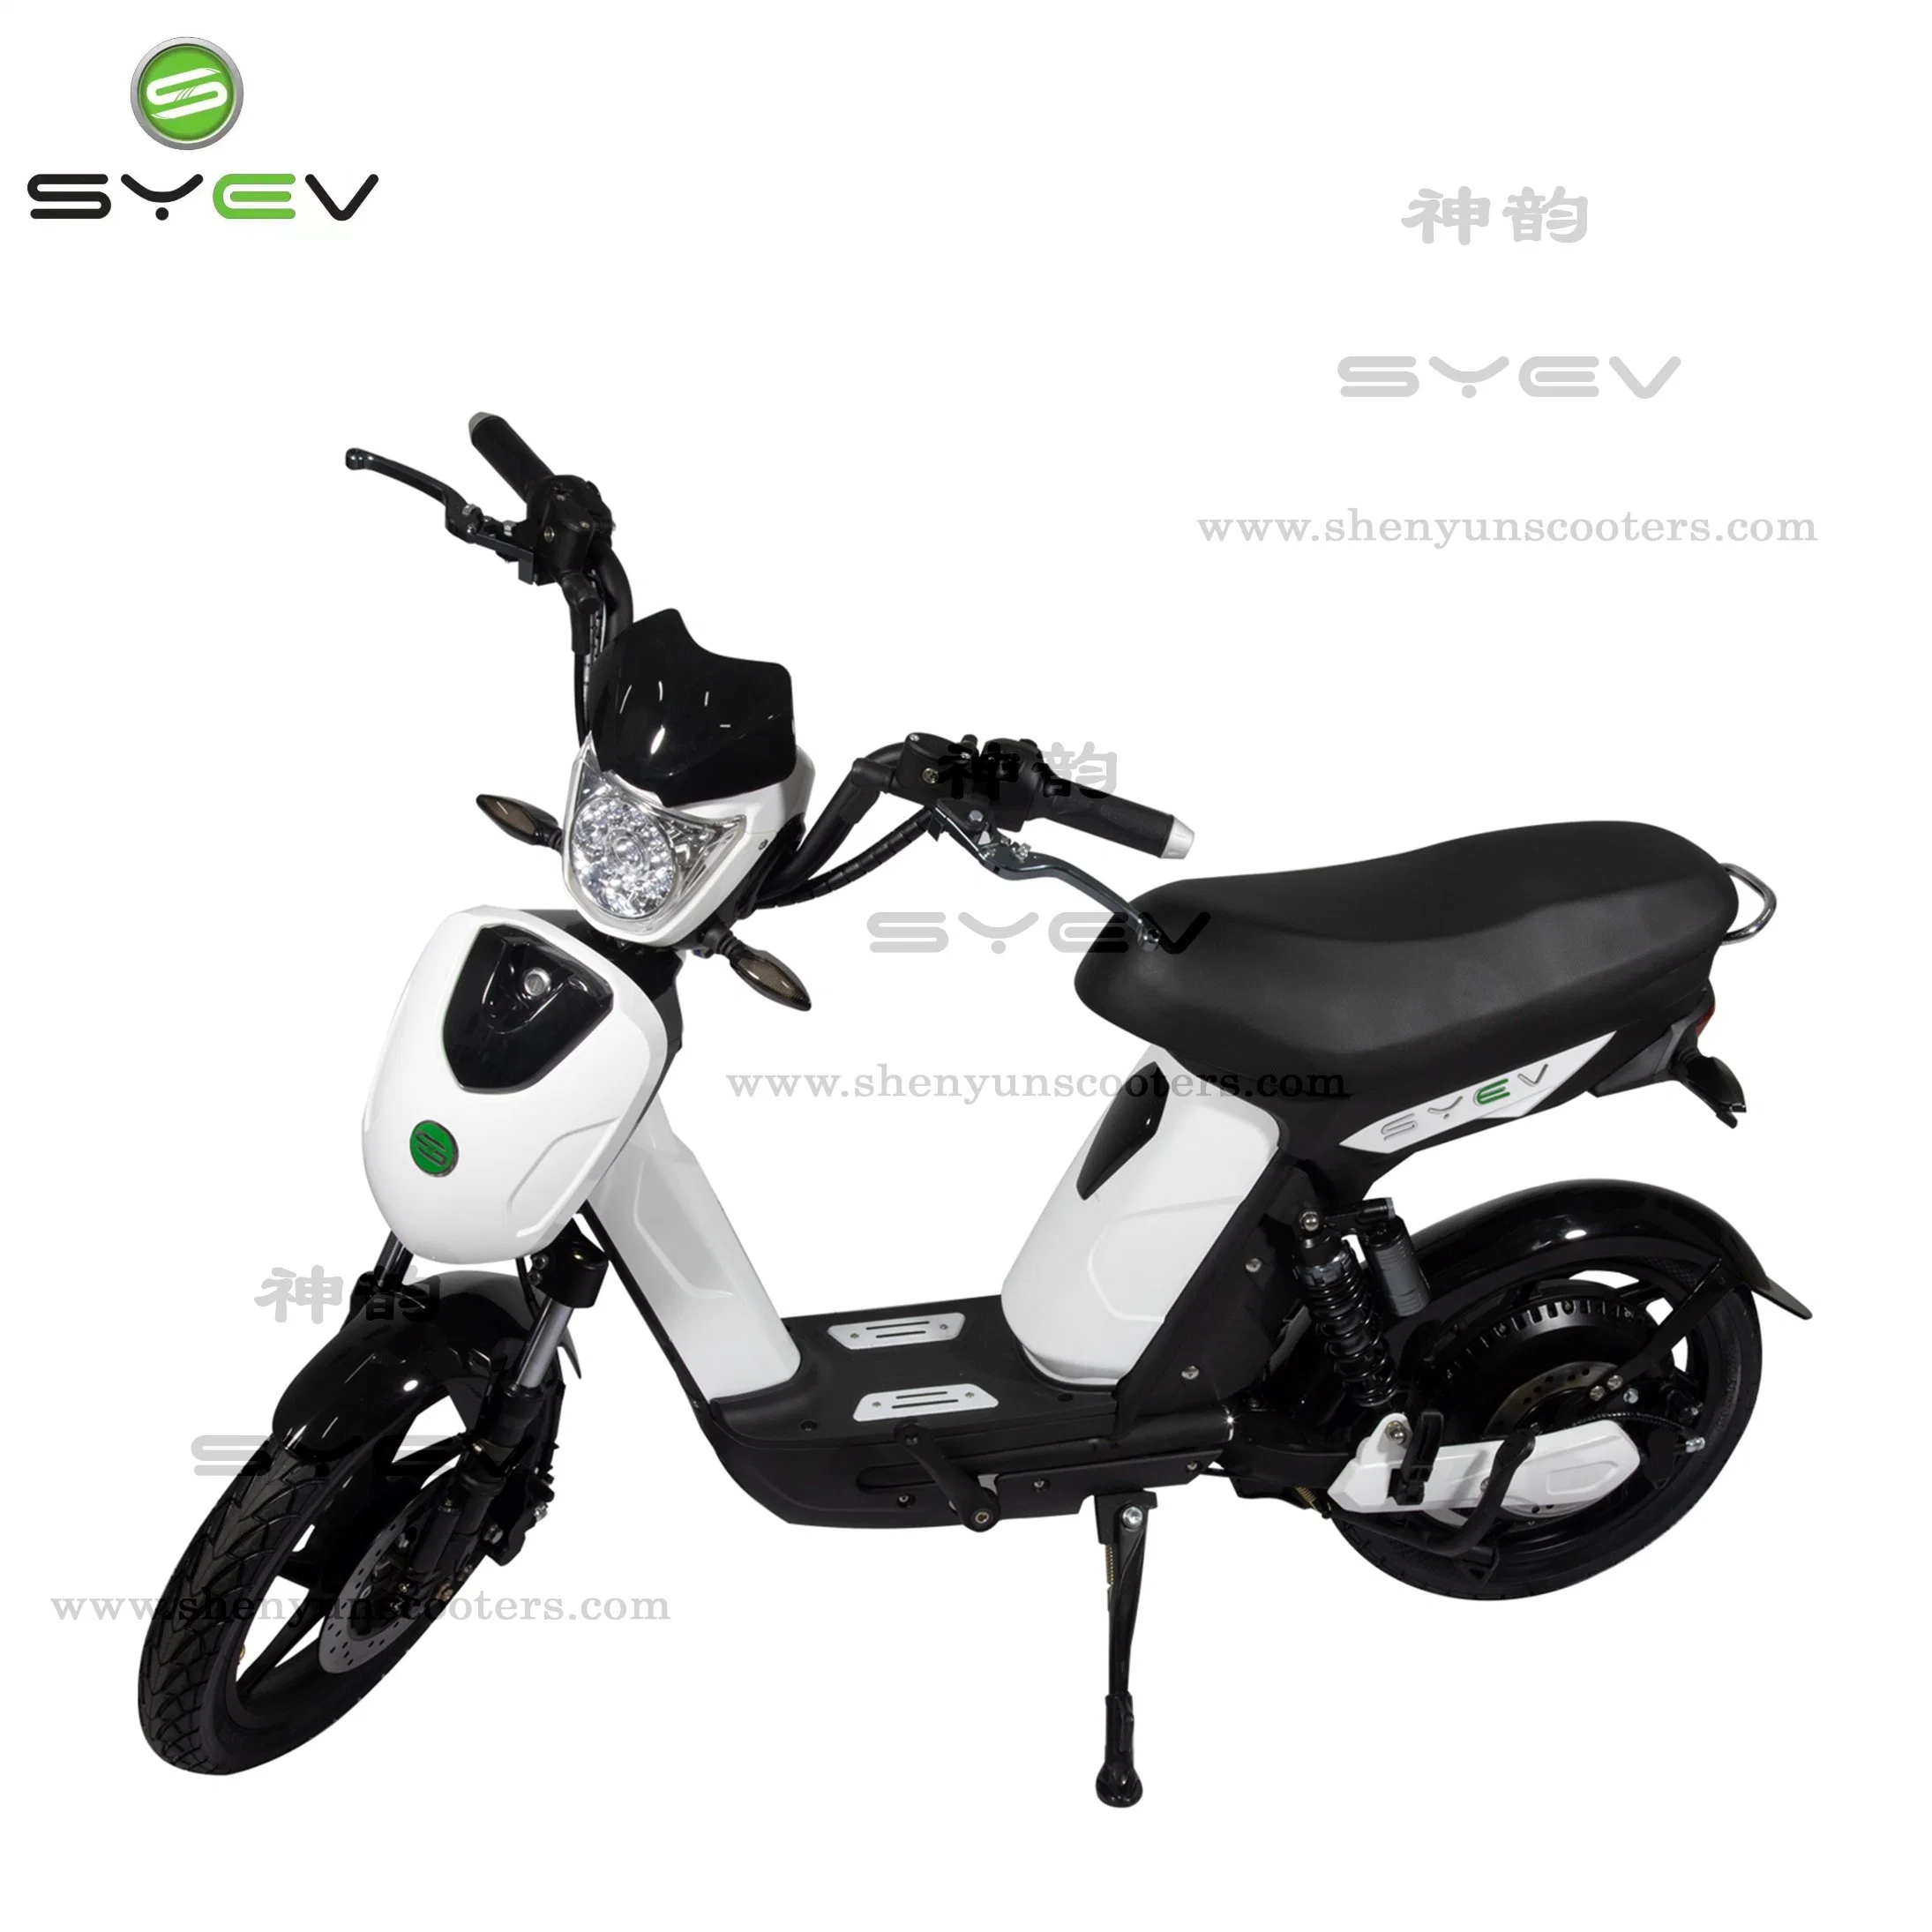 Syev Mini Cross Car Fat Tire EEC Electric Bike Moped Scooter con pedales